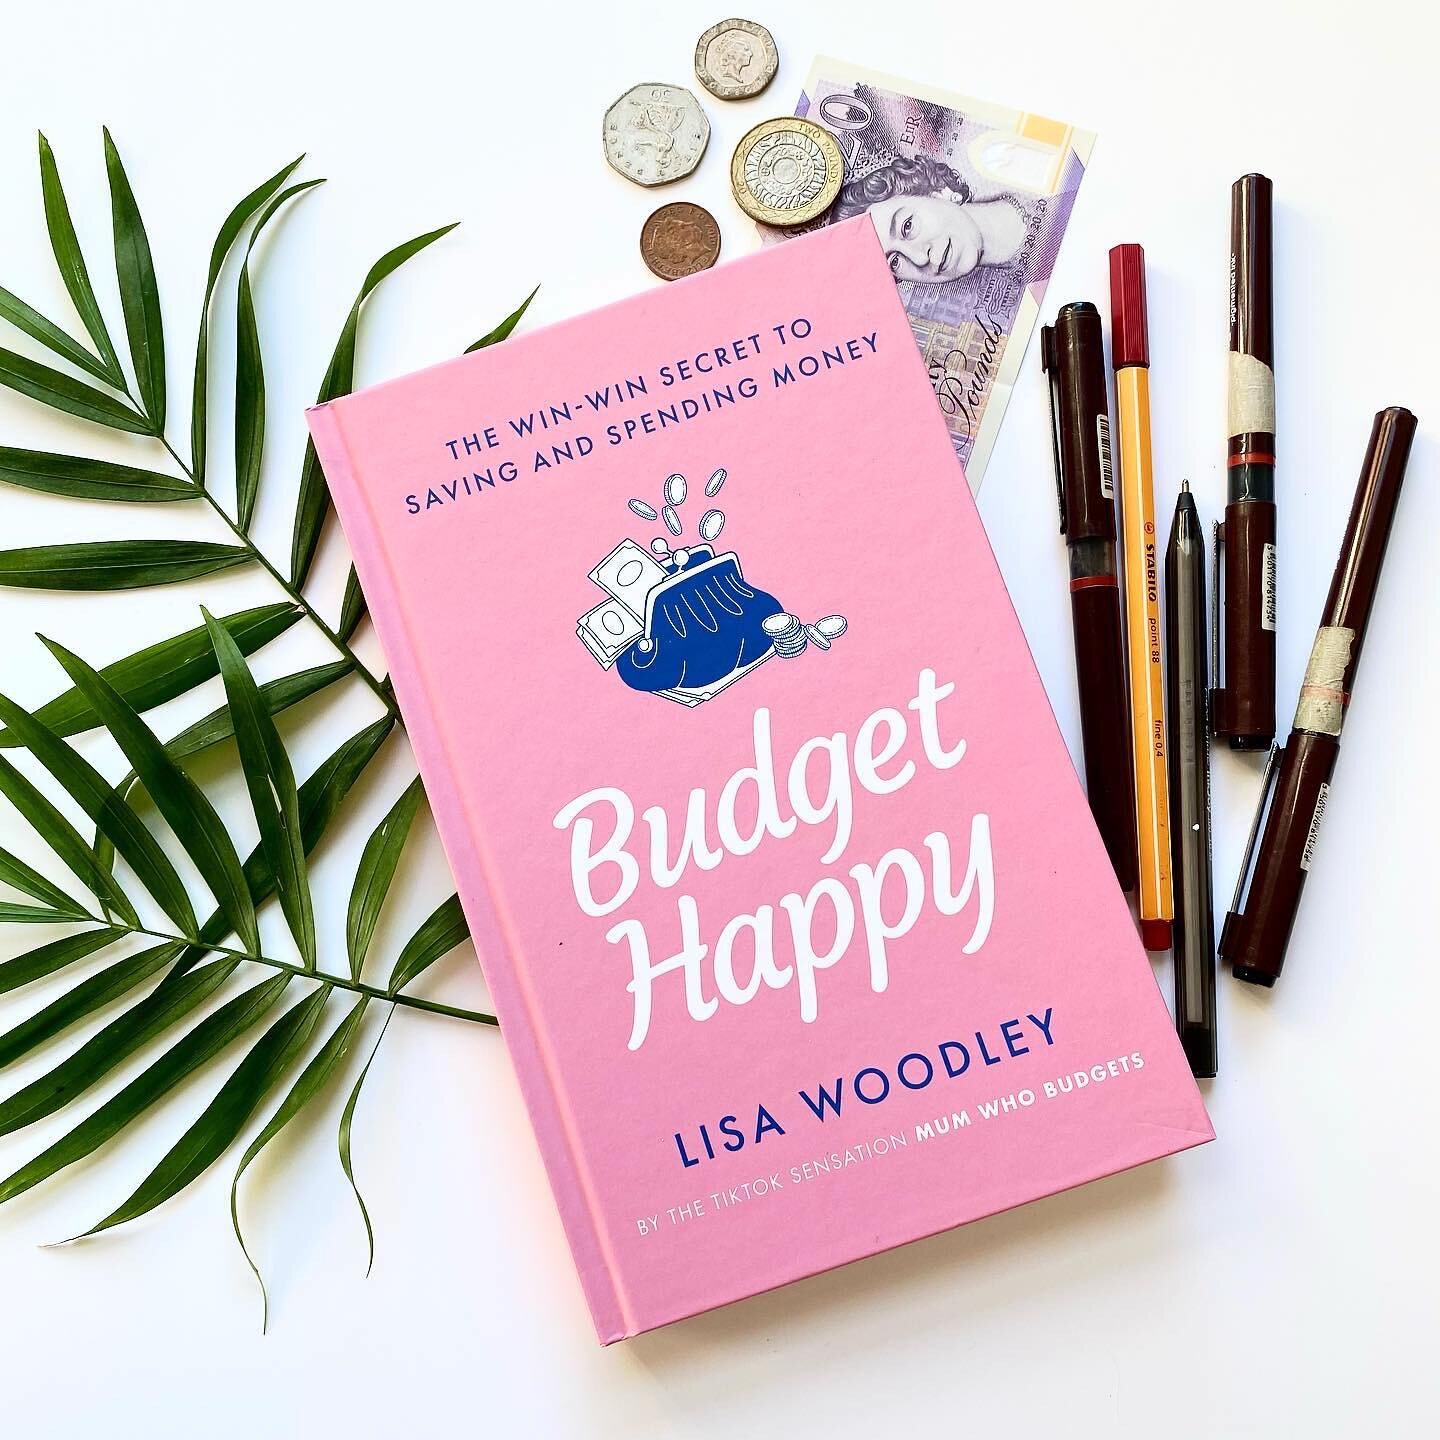 Excited to share that the publication of a book I recently illustrated is coming up on the 28th Feb - Budget Happy - by the wonderful @lisa_woodley81 (TikTok: @lisawoodley81 / Mum Who Budgets) Lisa shares her story, as well as all of her amazing tips